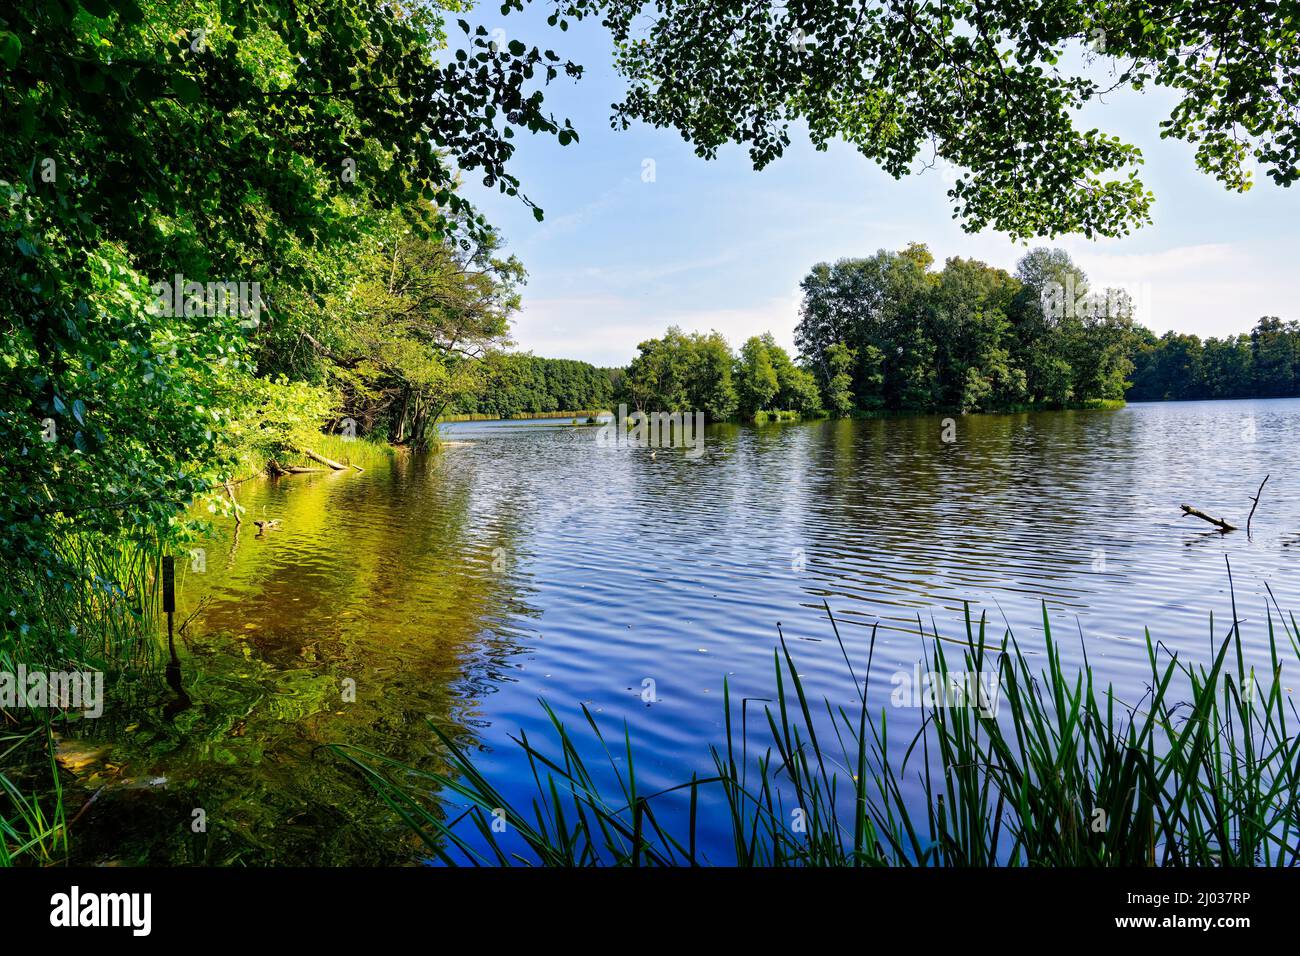 Lake Amts surrounded by forest, Biosphere reserve Schorfheide-Chorin, Brandenburg, Germany, Europe Stock Photo